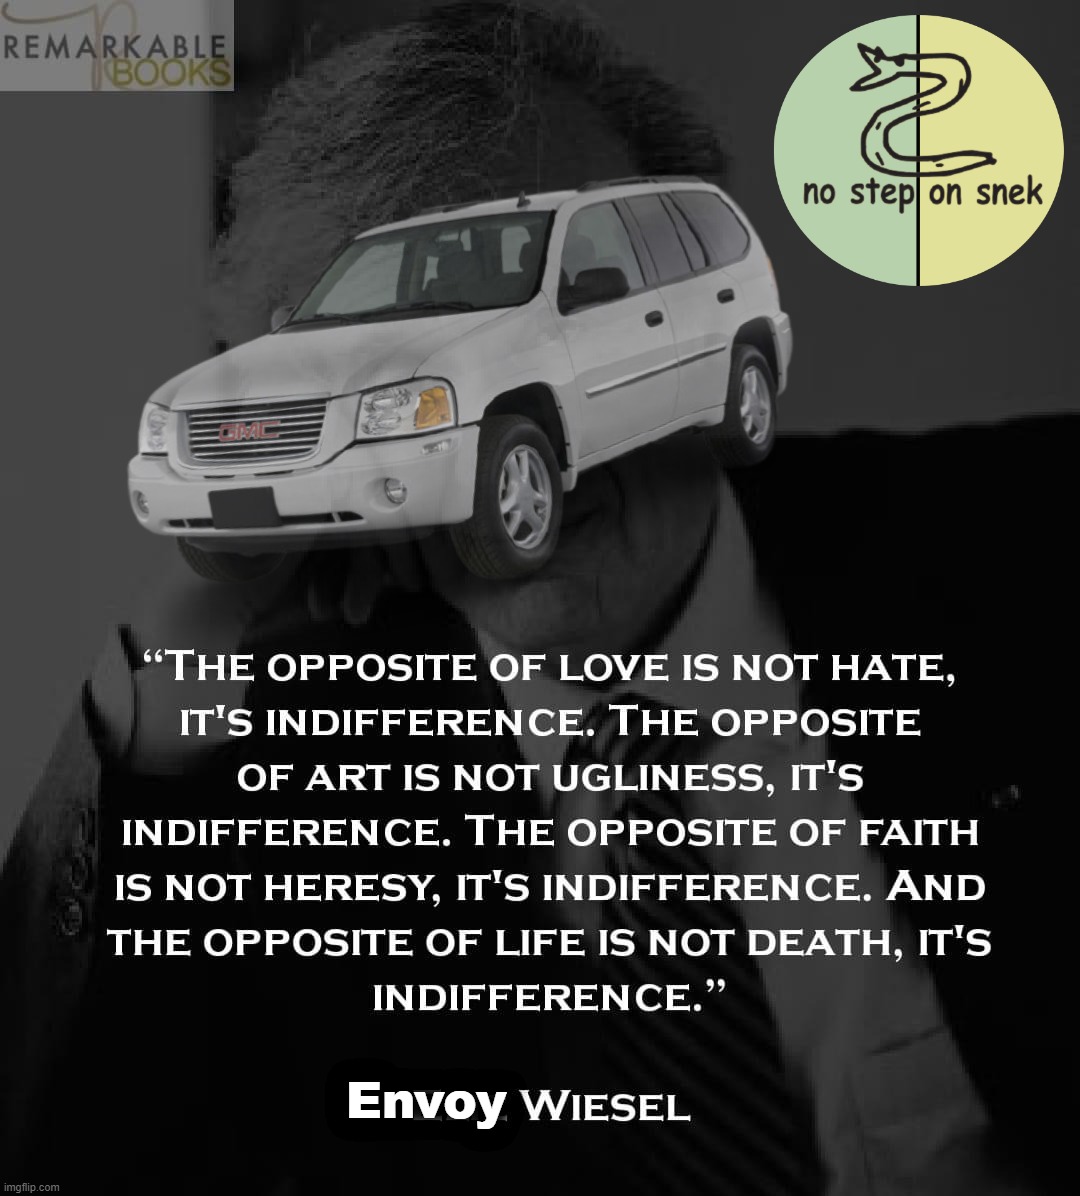 - based one, Envoy Wiesel - | Envoy | image tagged in elie wiesel quote,envoy,wiesel,envoy wiesel,libertarian alliance,words of wisdom | made w/ Imgflip meme maker